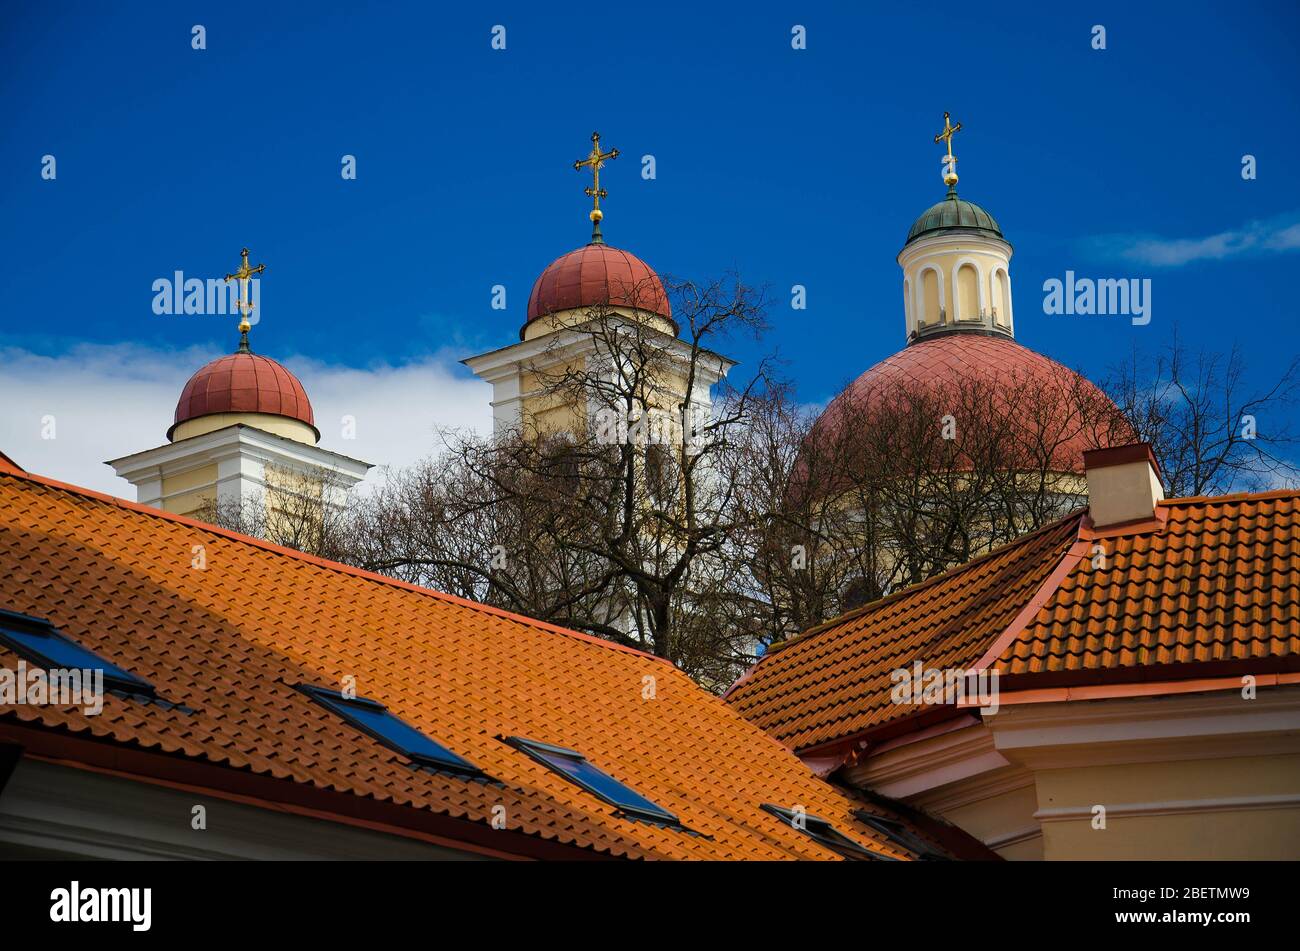 Church domes with crosses and red tiled roofs and blue sky on background, Vilnius, Lithuania Stock Photo